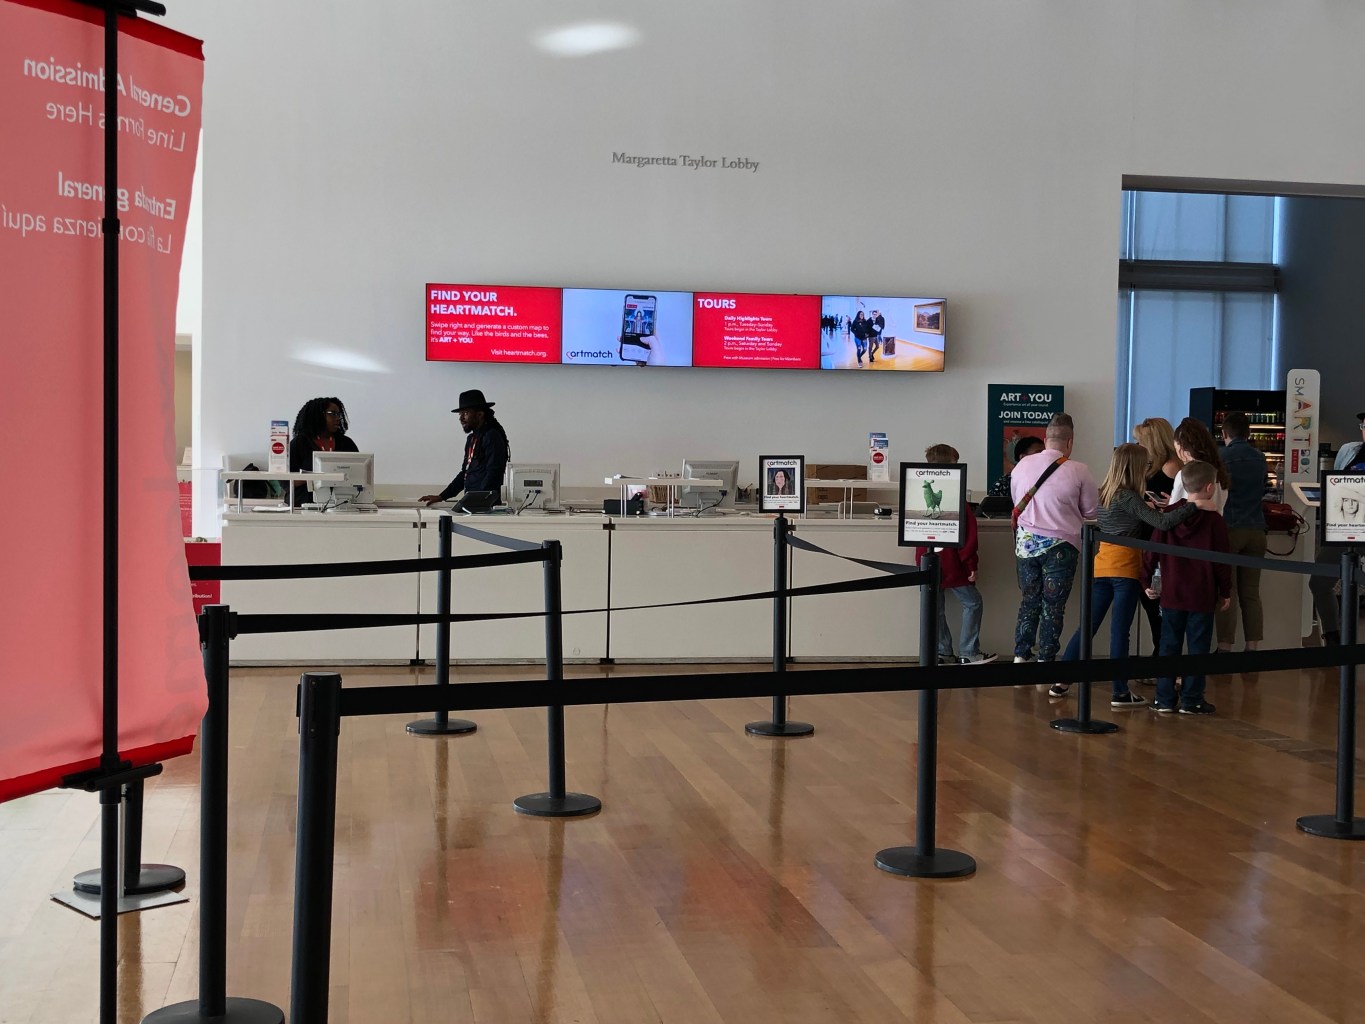 The ticket line in the lobby of the museum shows signs advertising Heartmatch on top of stanchions and on a TV screen behind the desk.